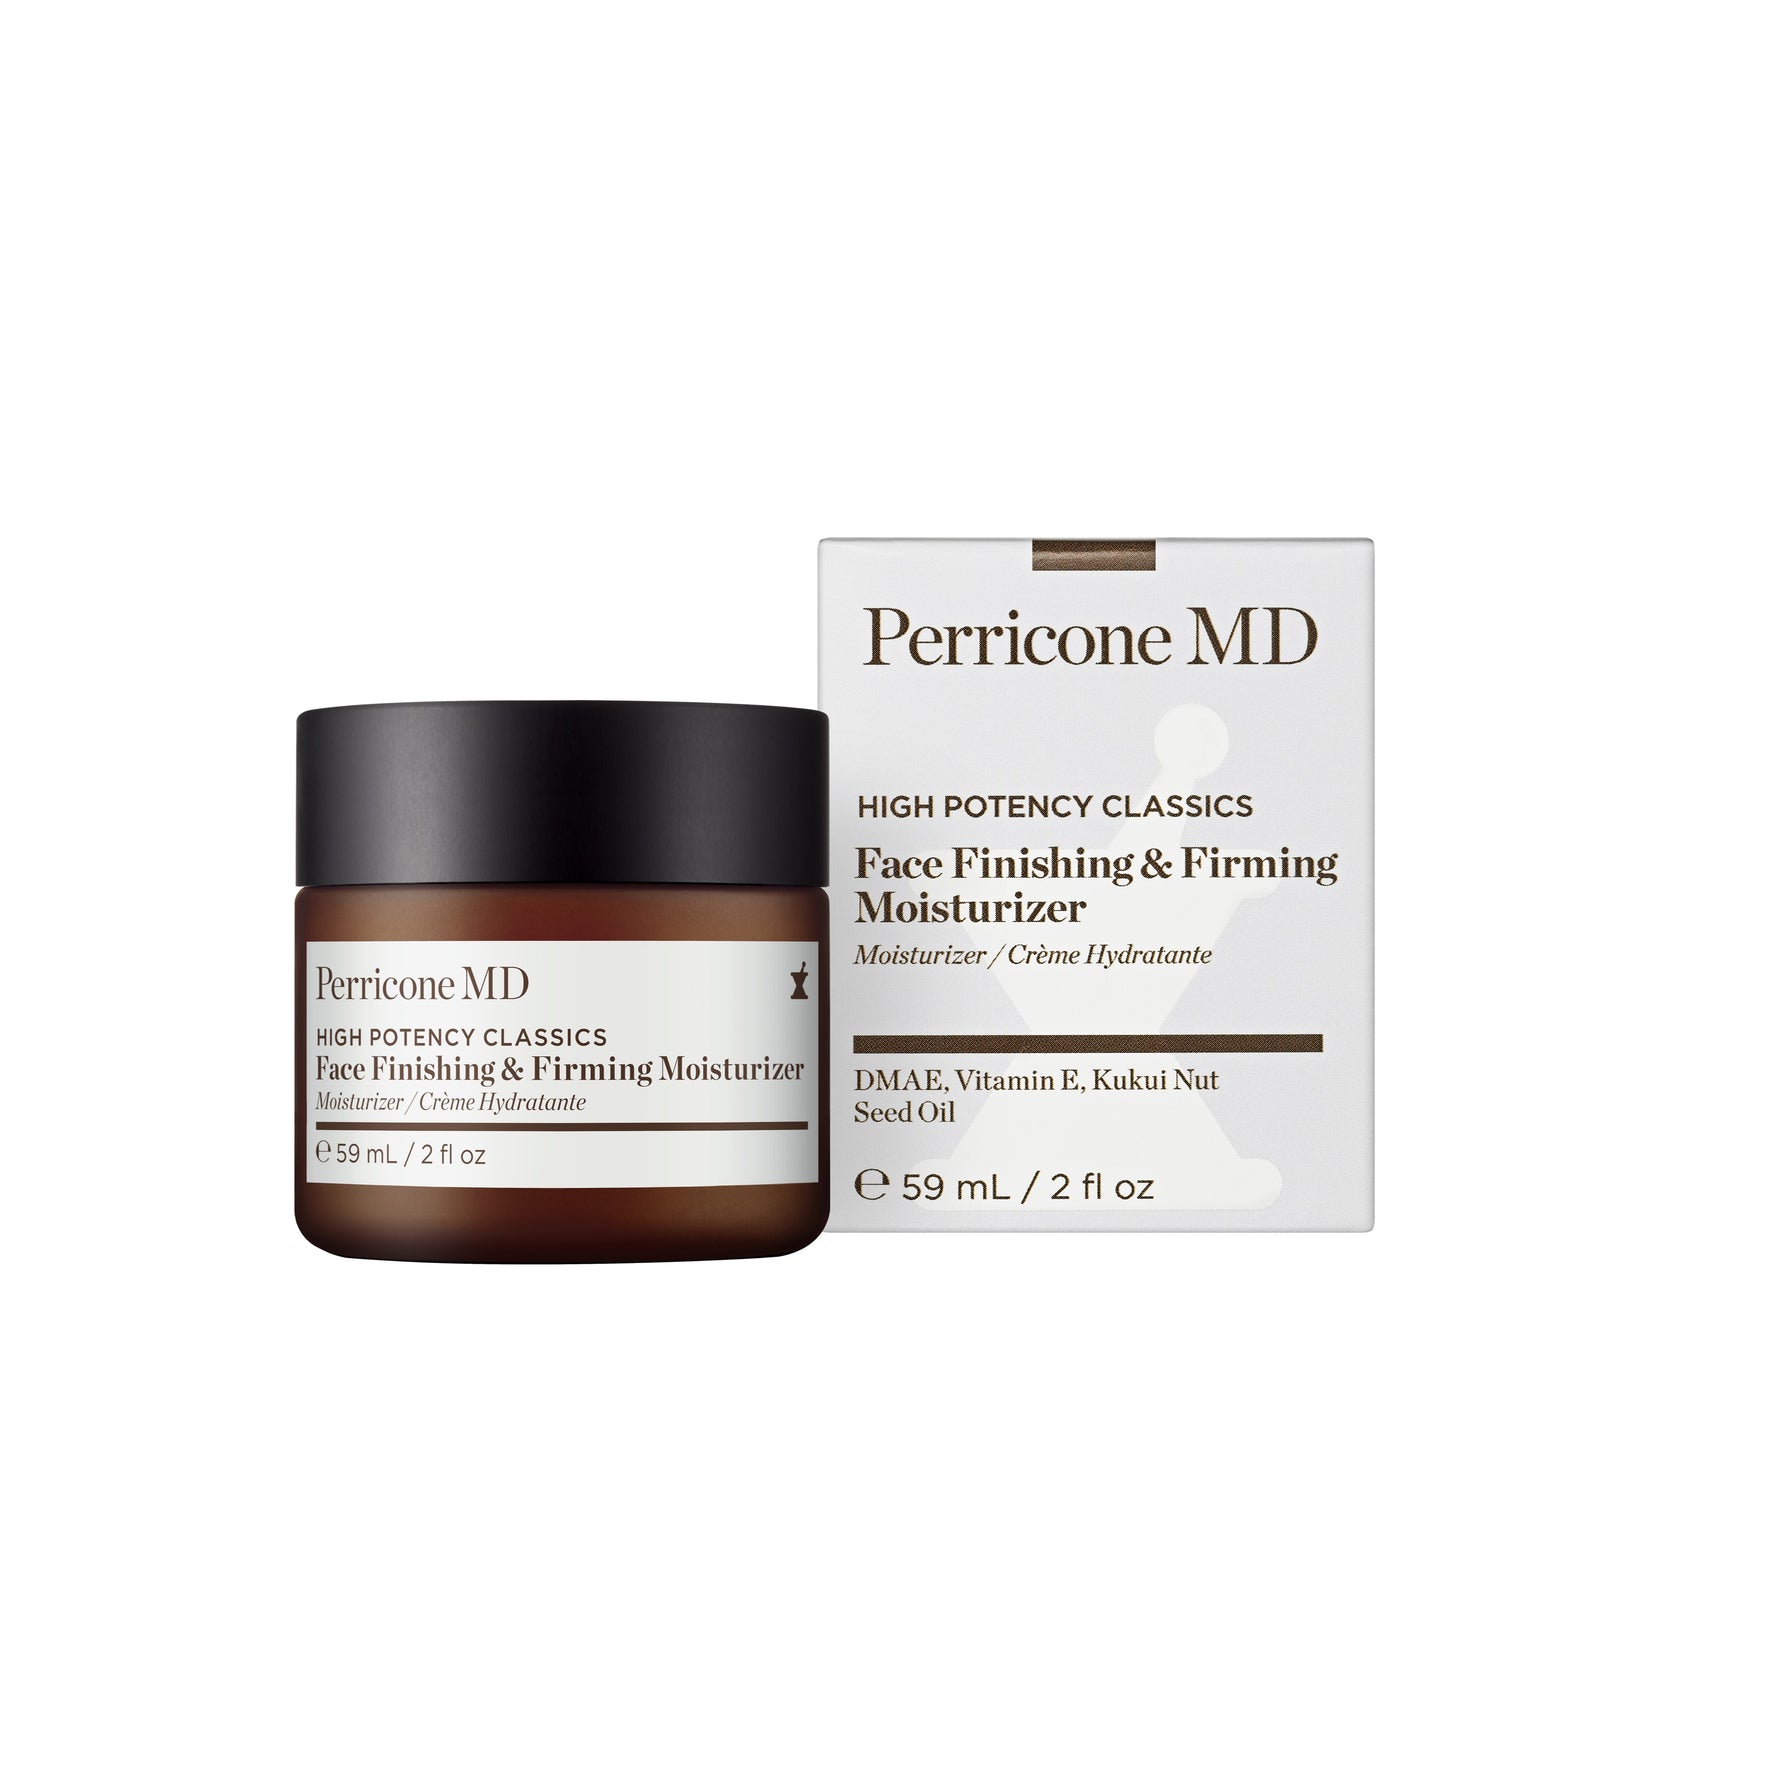 Perricone MD Face Finishing & Firming Moisturizer (59ml)